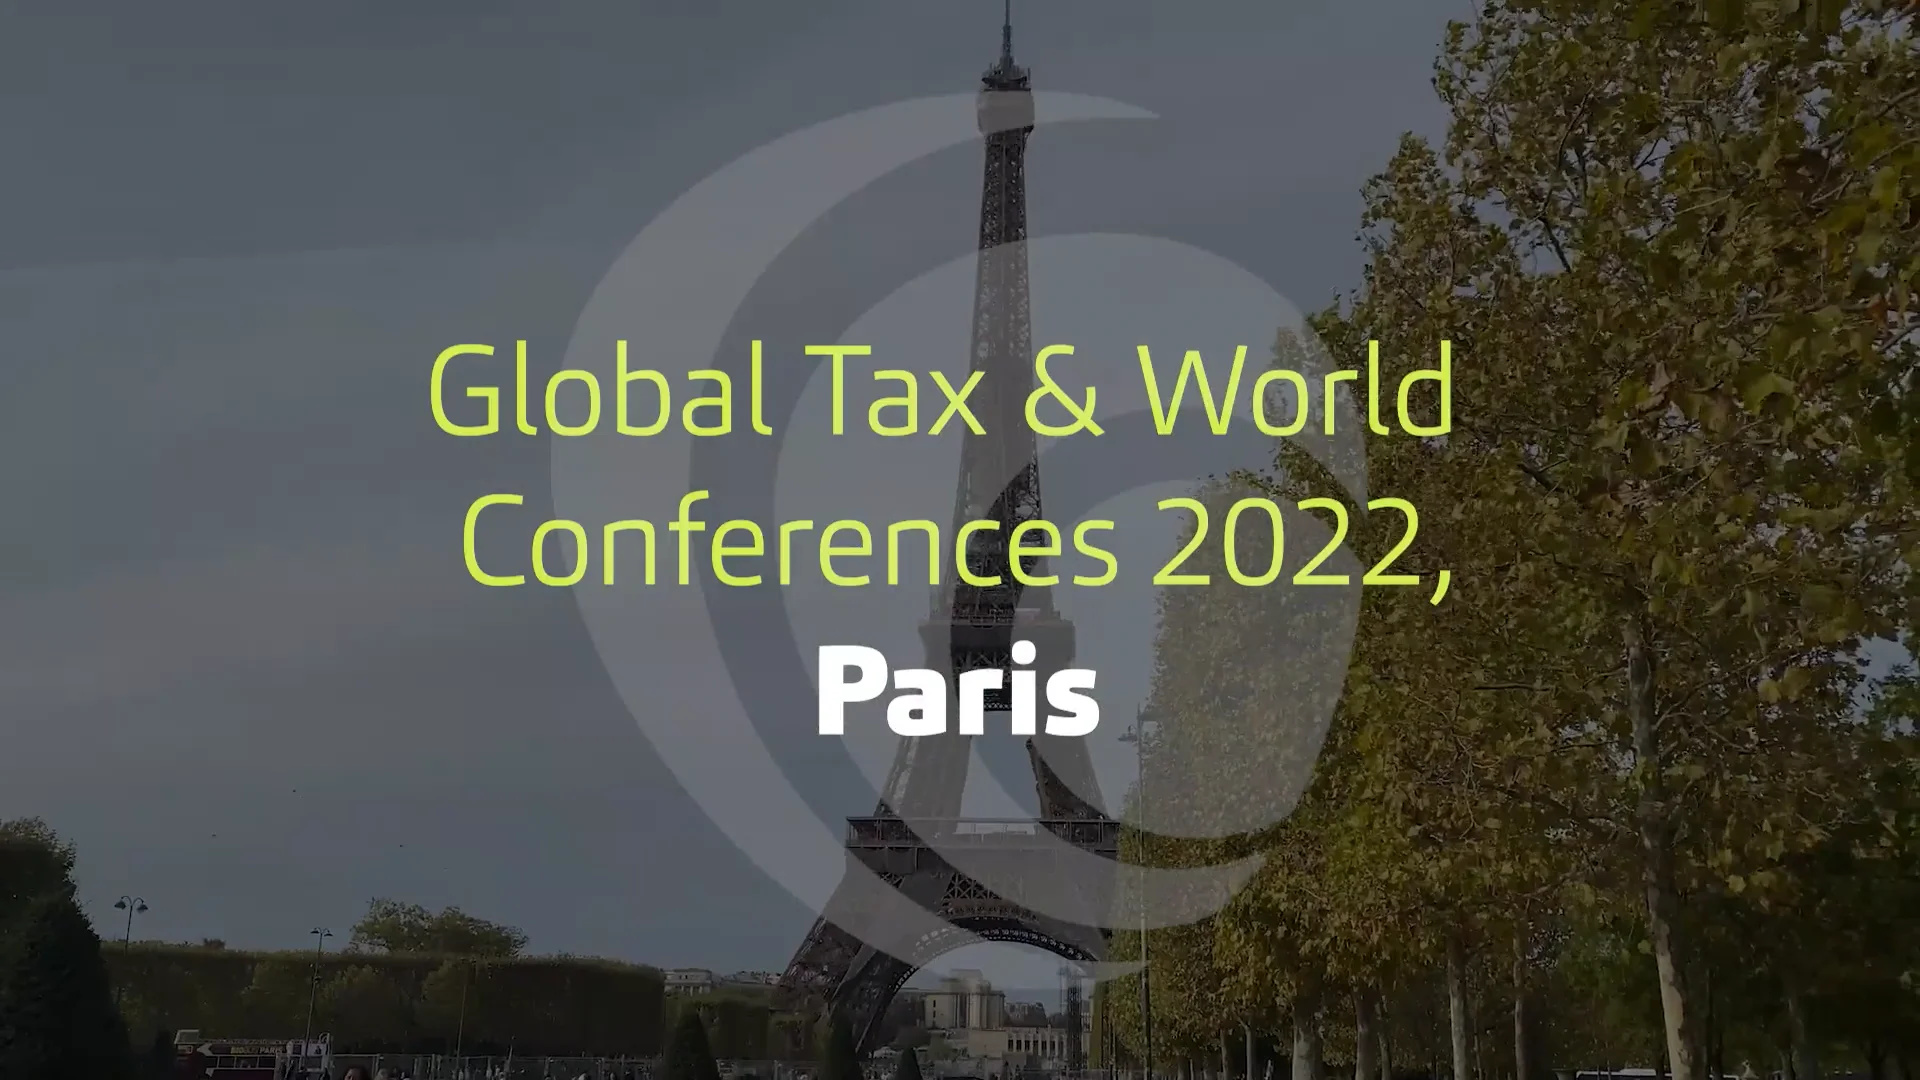 Tax & World Conference 2022 Highlights